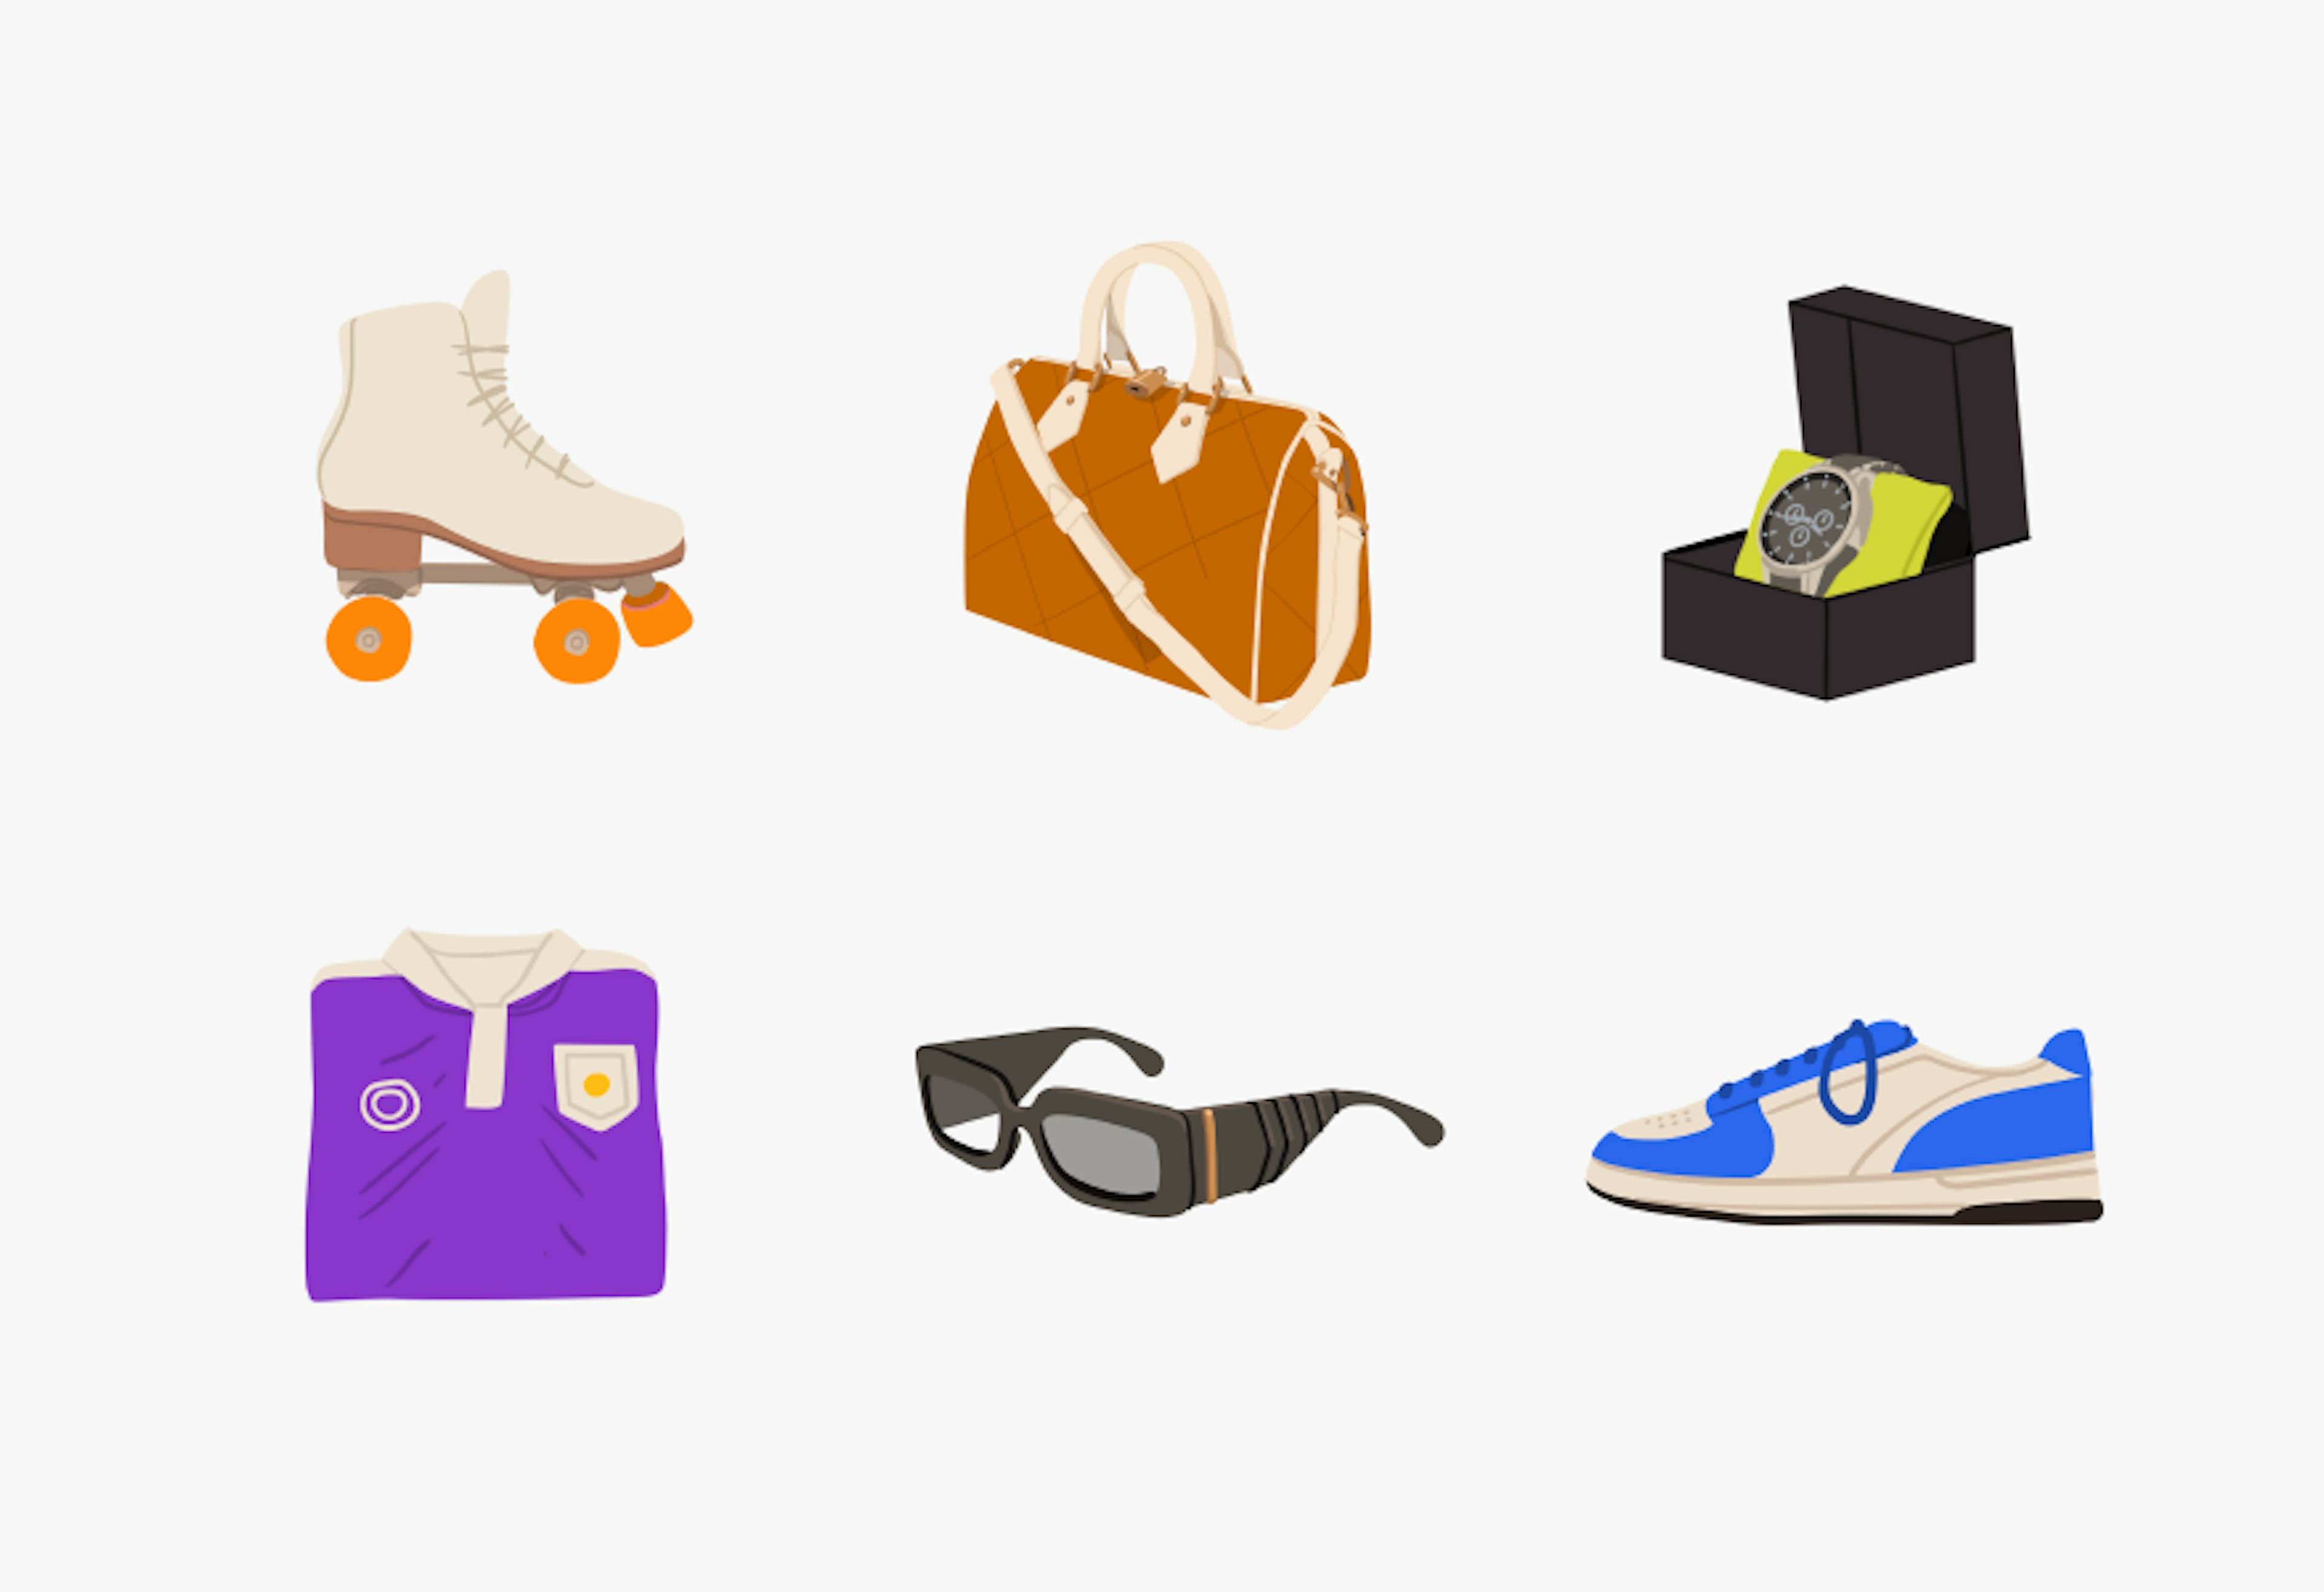 6 distinct illustrations highlighting the fashion category:
A white roller skate with orange wheels.
A brown handbag with white straps.
A wristwatch with a dark face in an open black box with a lime green cushion.
A purple sports jersey with a white collar and pocket.
A pair of black sunglasses.
A white and blue sneaker.